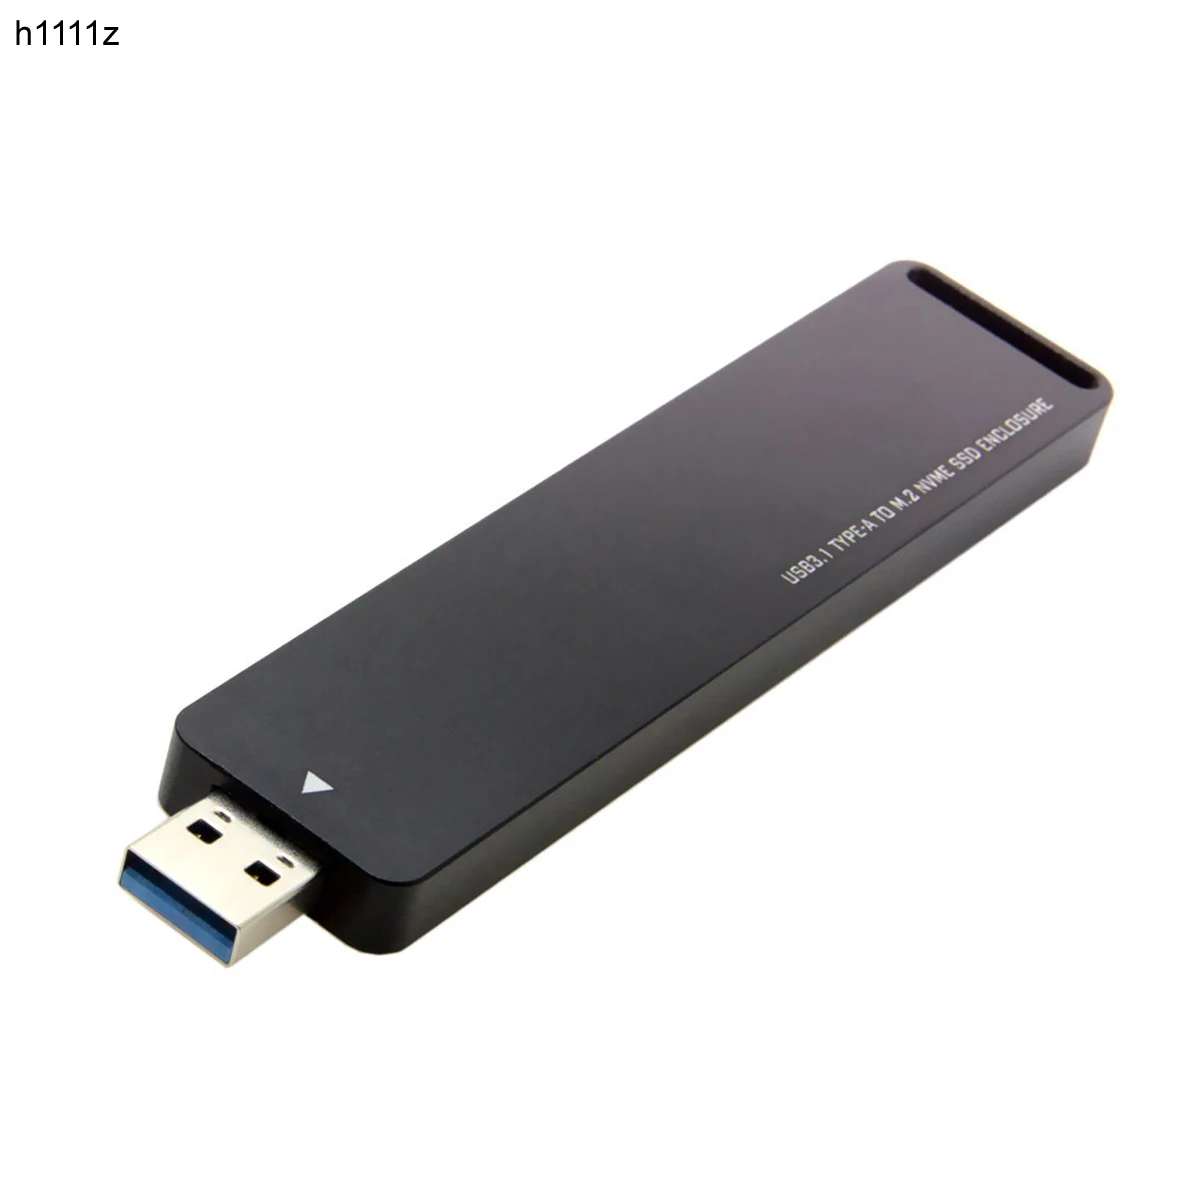 SSD Case NVME To USB Adapter 10 Gbps Usb 3.1 Gen 2 M.2 PCIE SSD To Type-A Card No Cable Needed USB To M2 Solid State Drive Key M